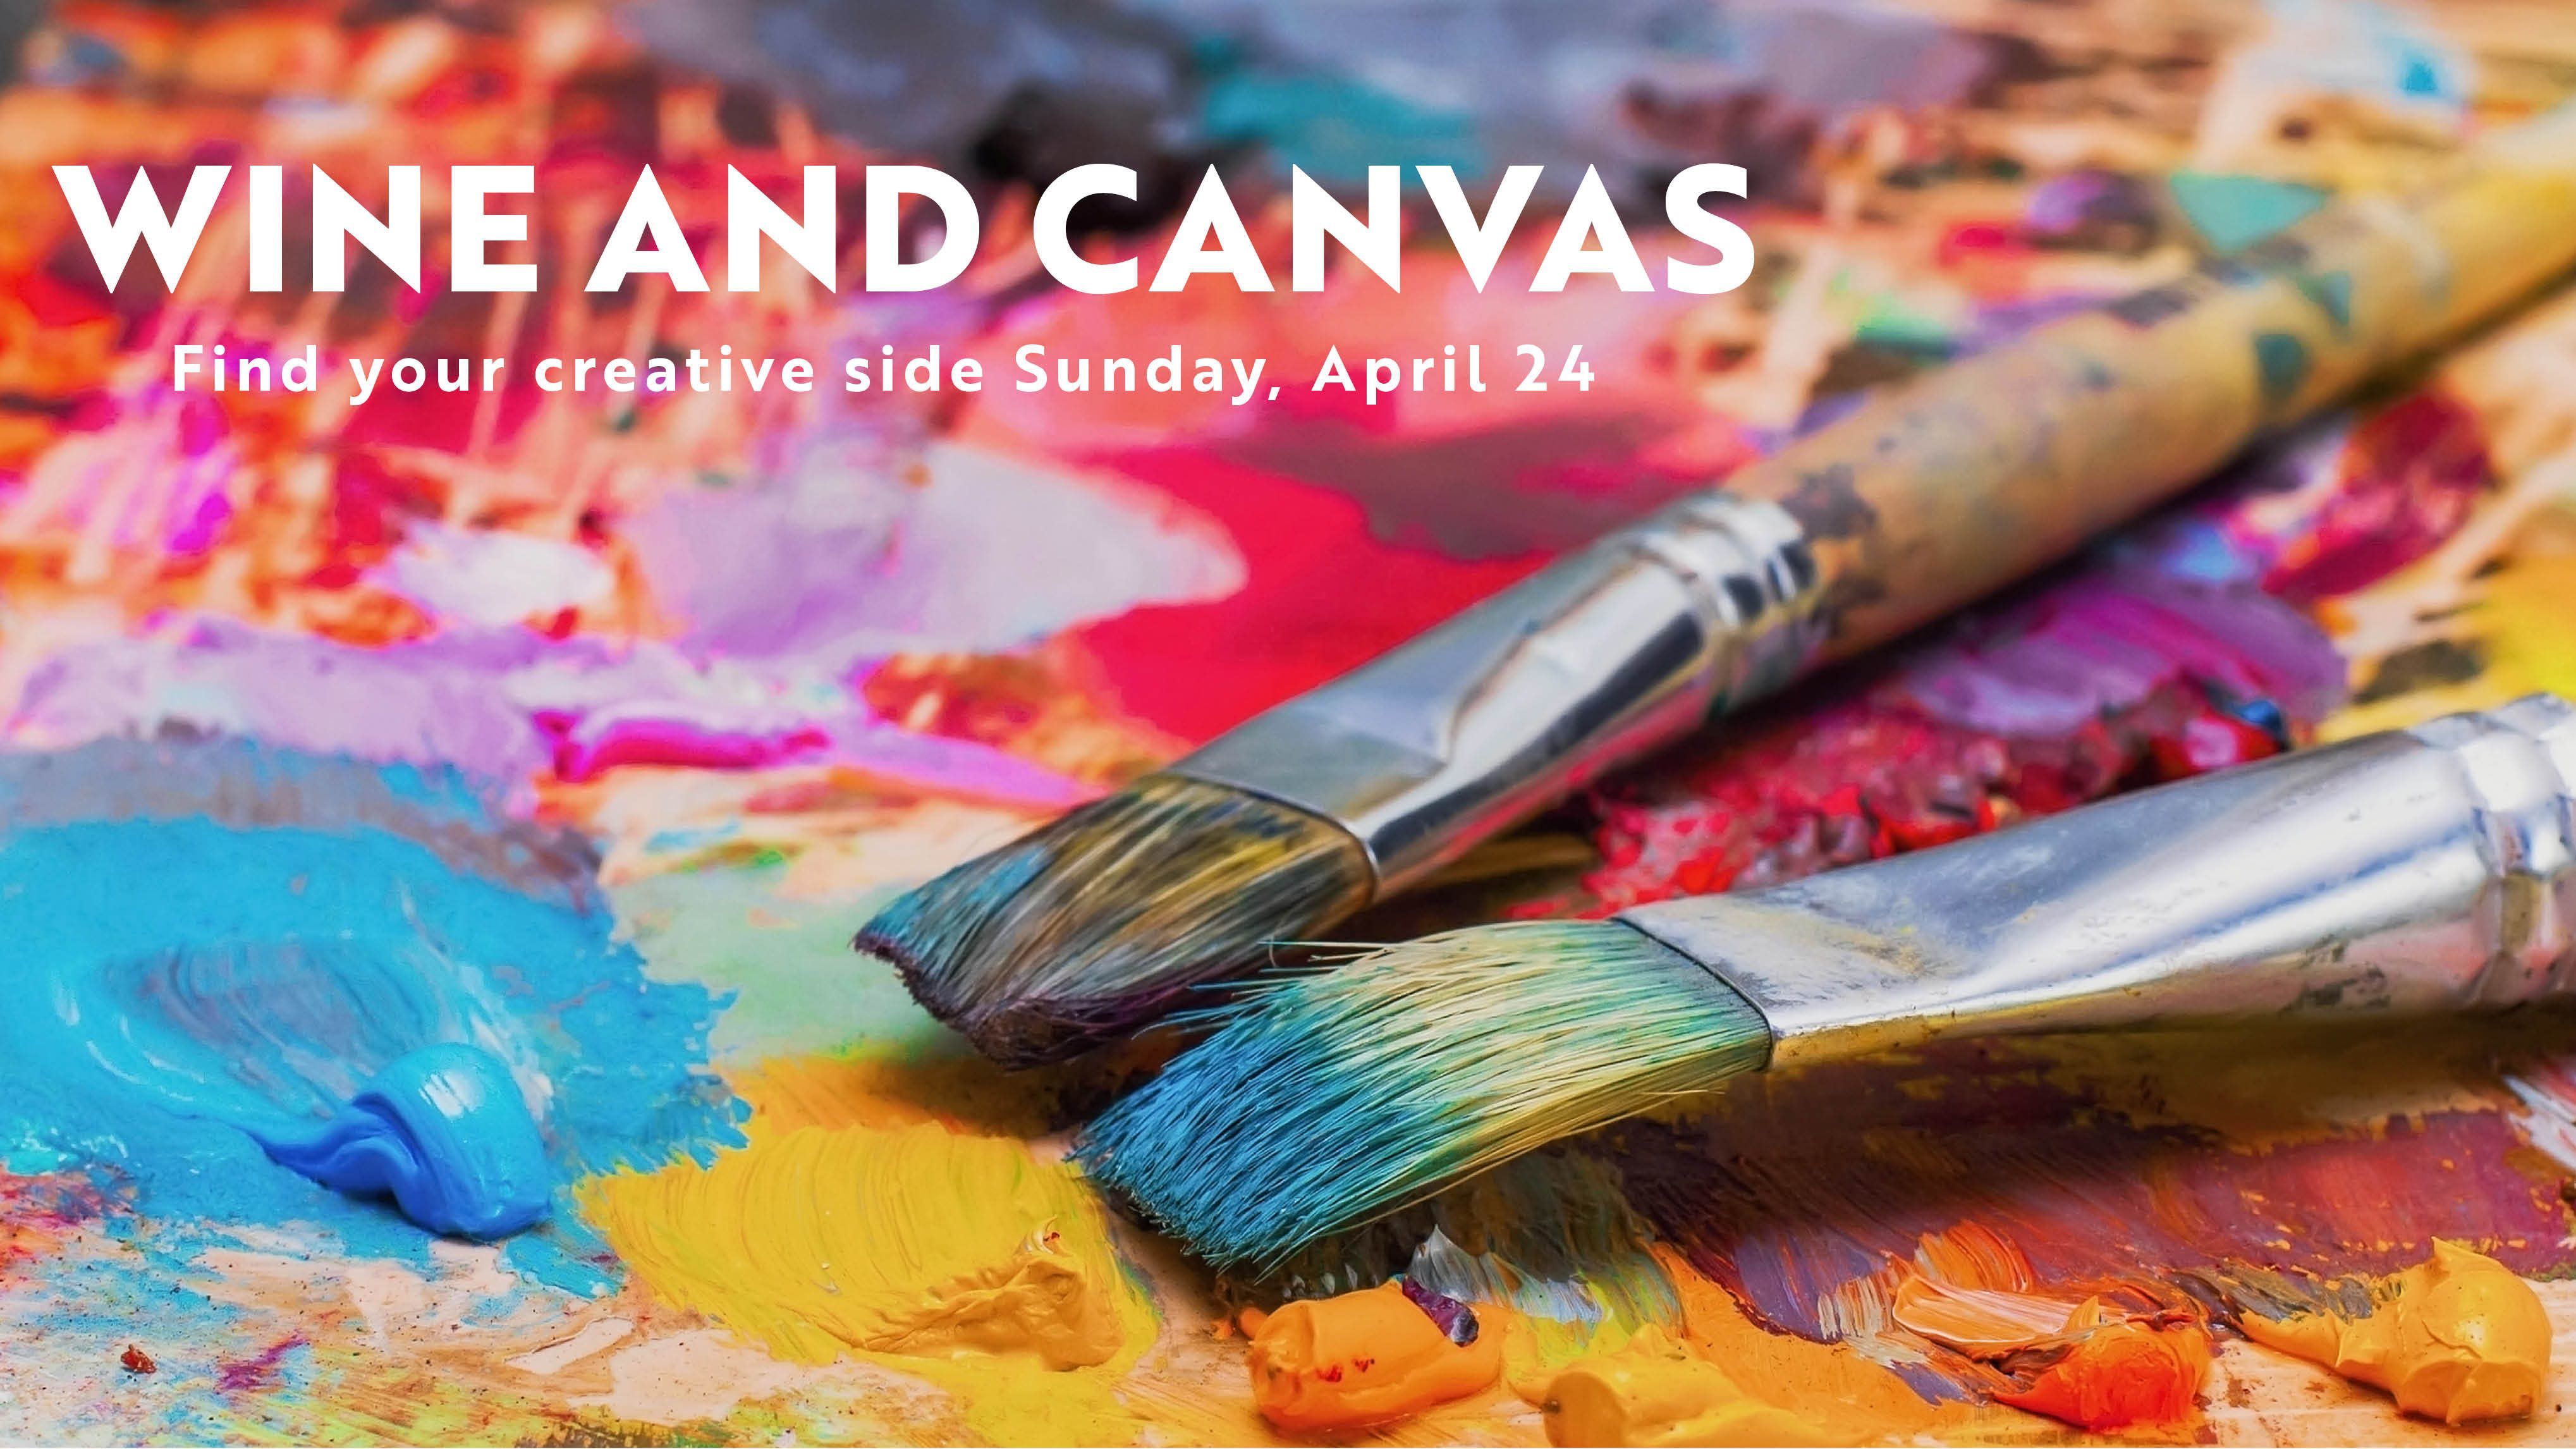 Come to the Federation for Wine and Canvas on April 24